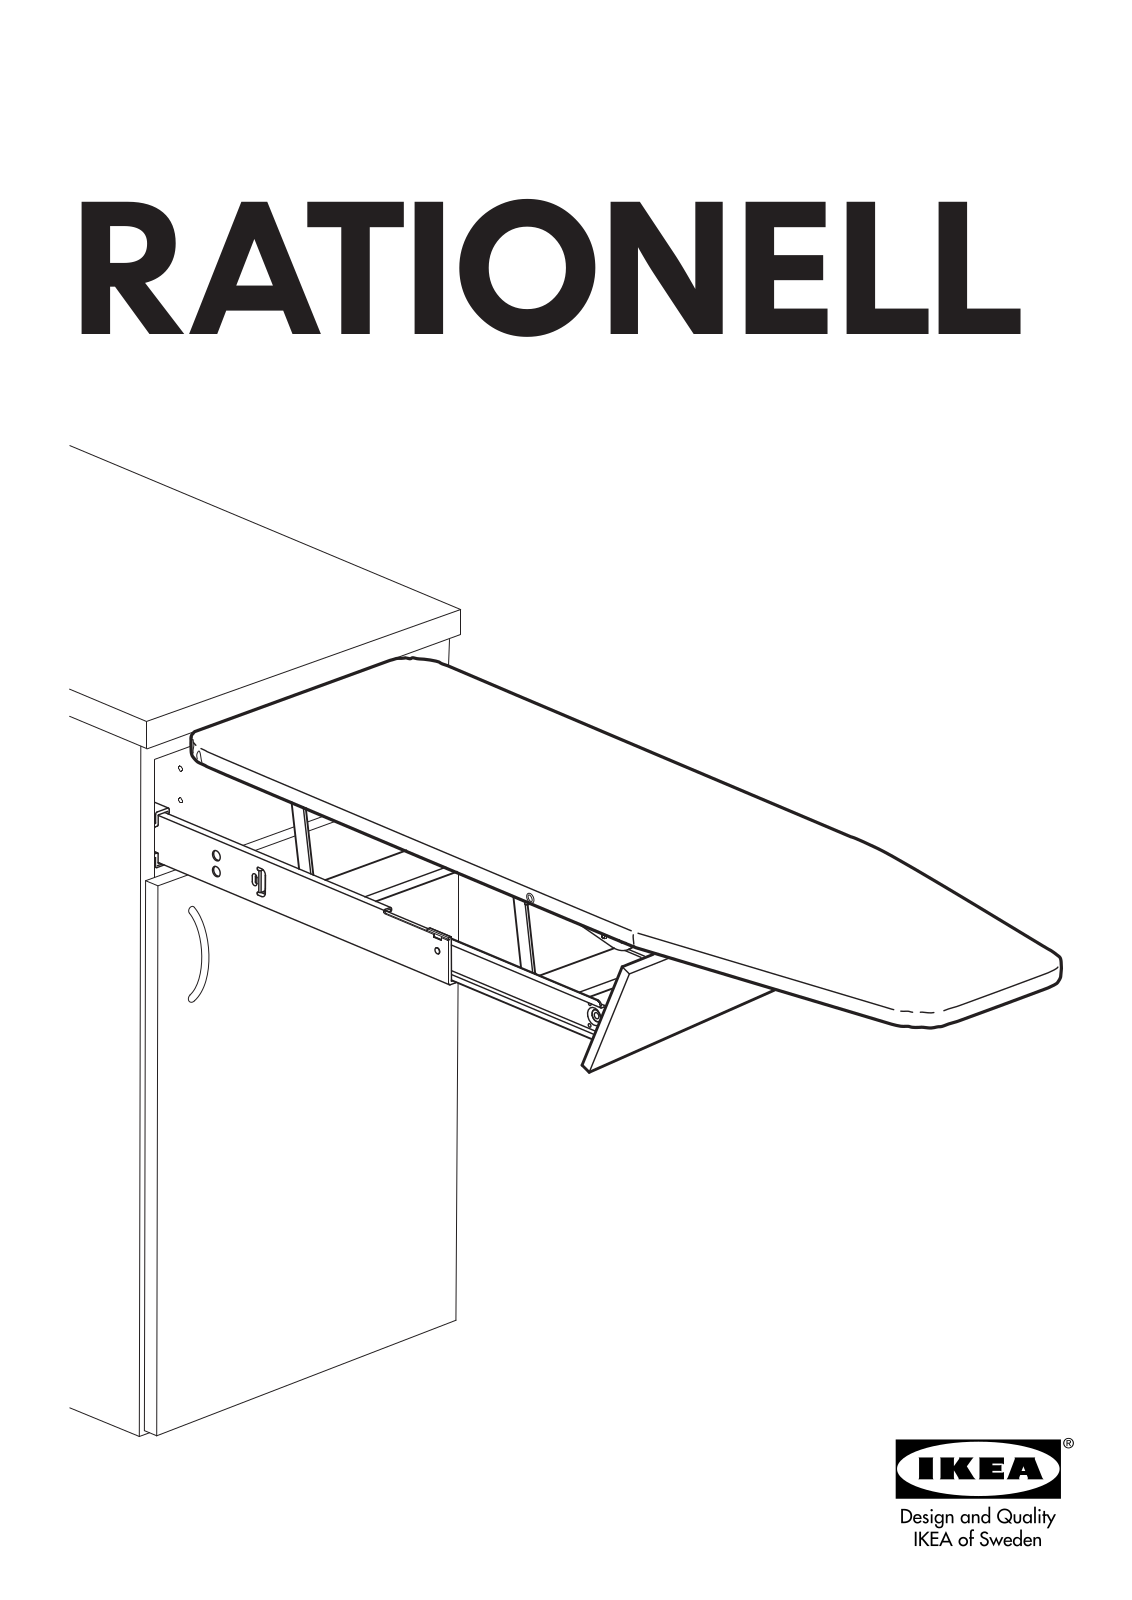 IKEA RATIONELL PULL OUT IRONING BOARD Assembly Instruction